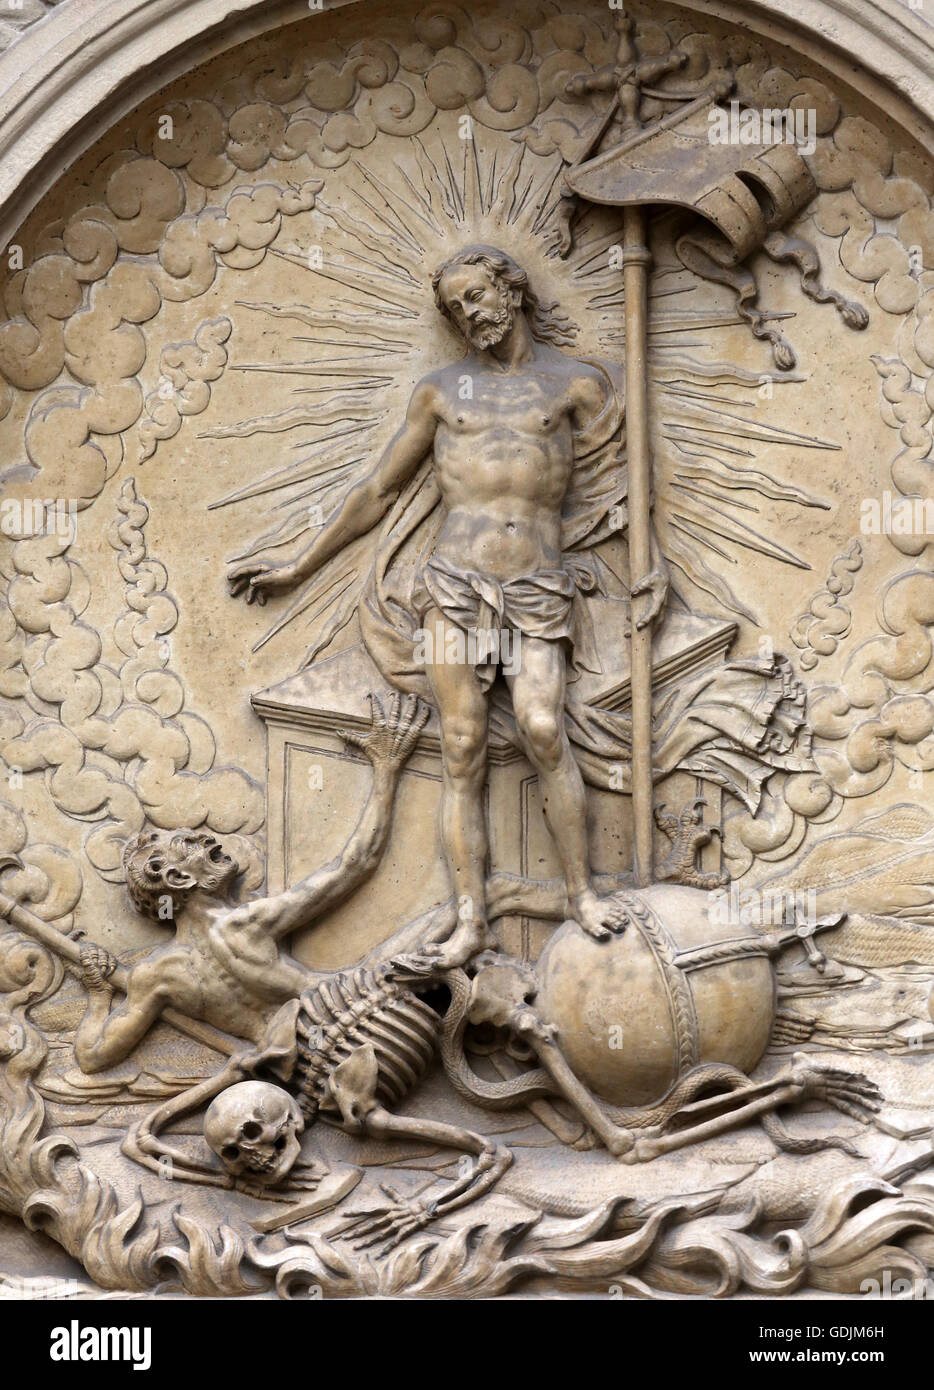 Resurrection of Christ, Architectural details from the external walls of St Stephen's Cathedral in Vienna, Austria Stock Photo